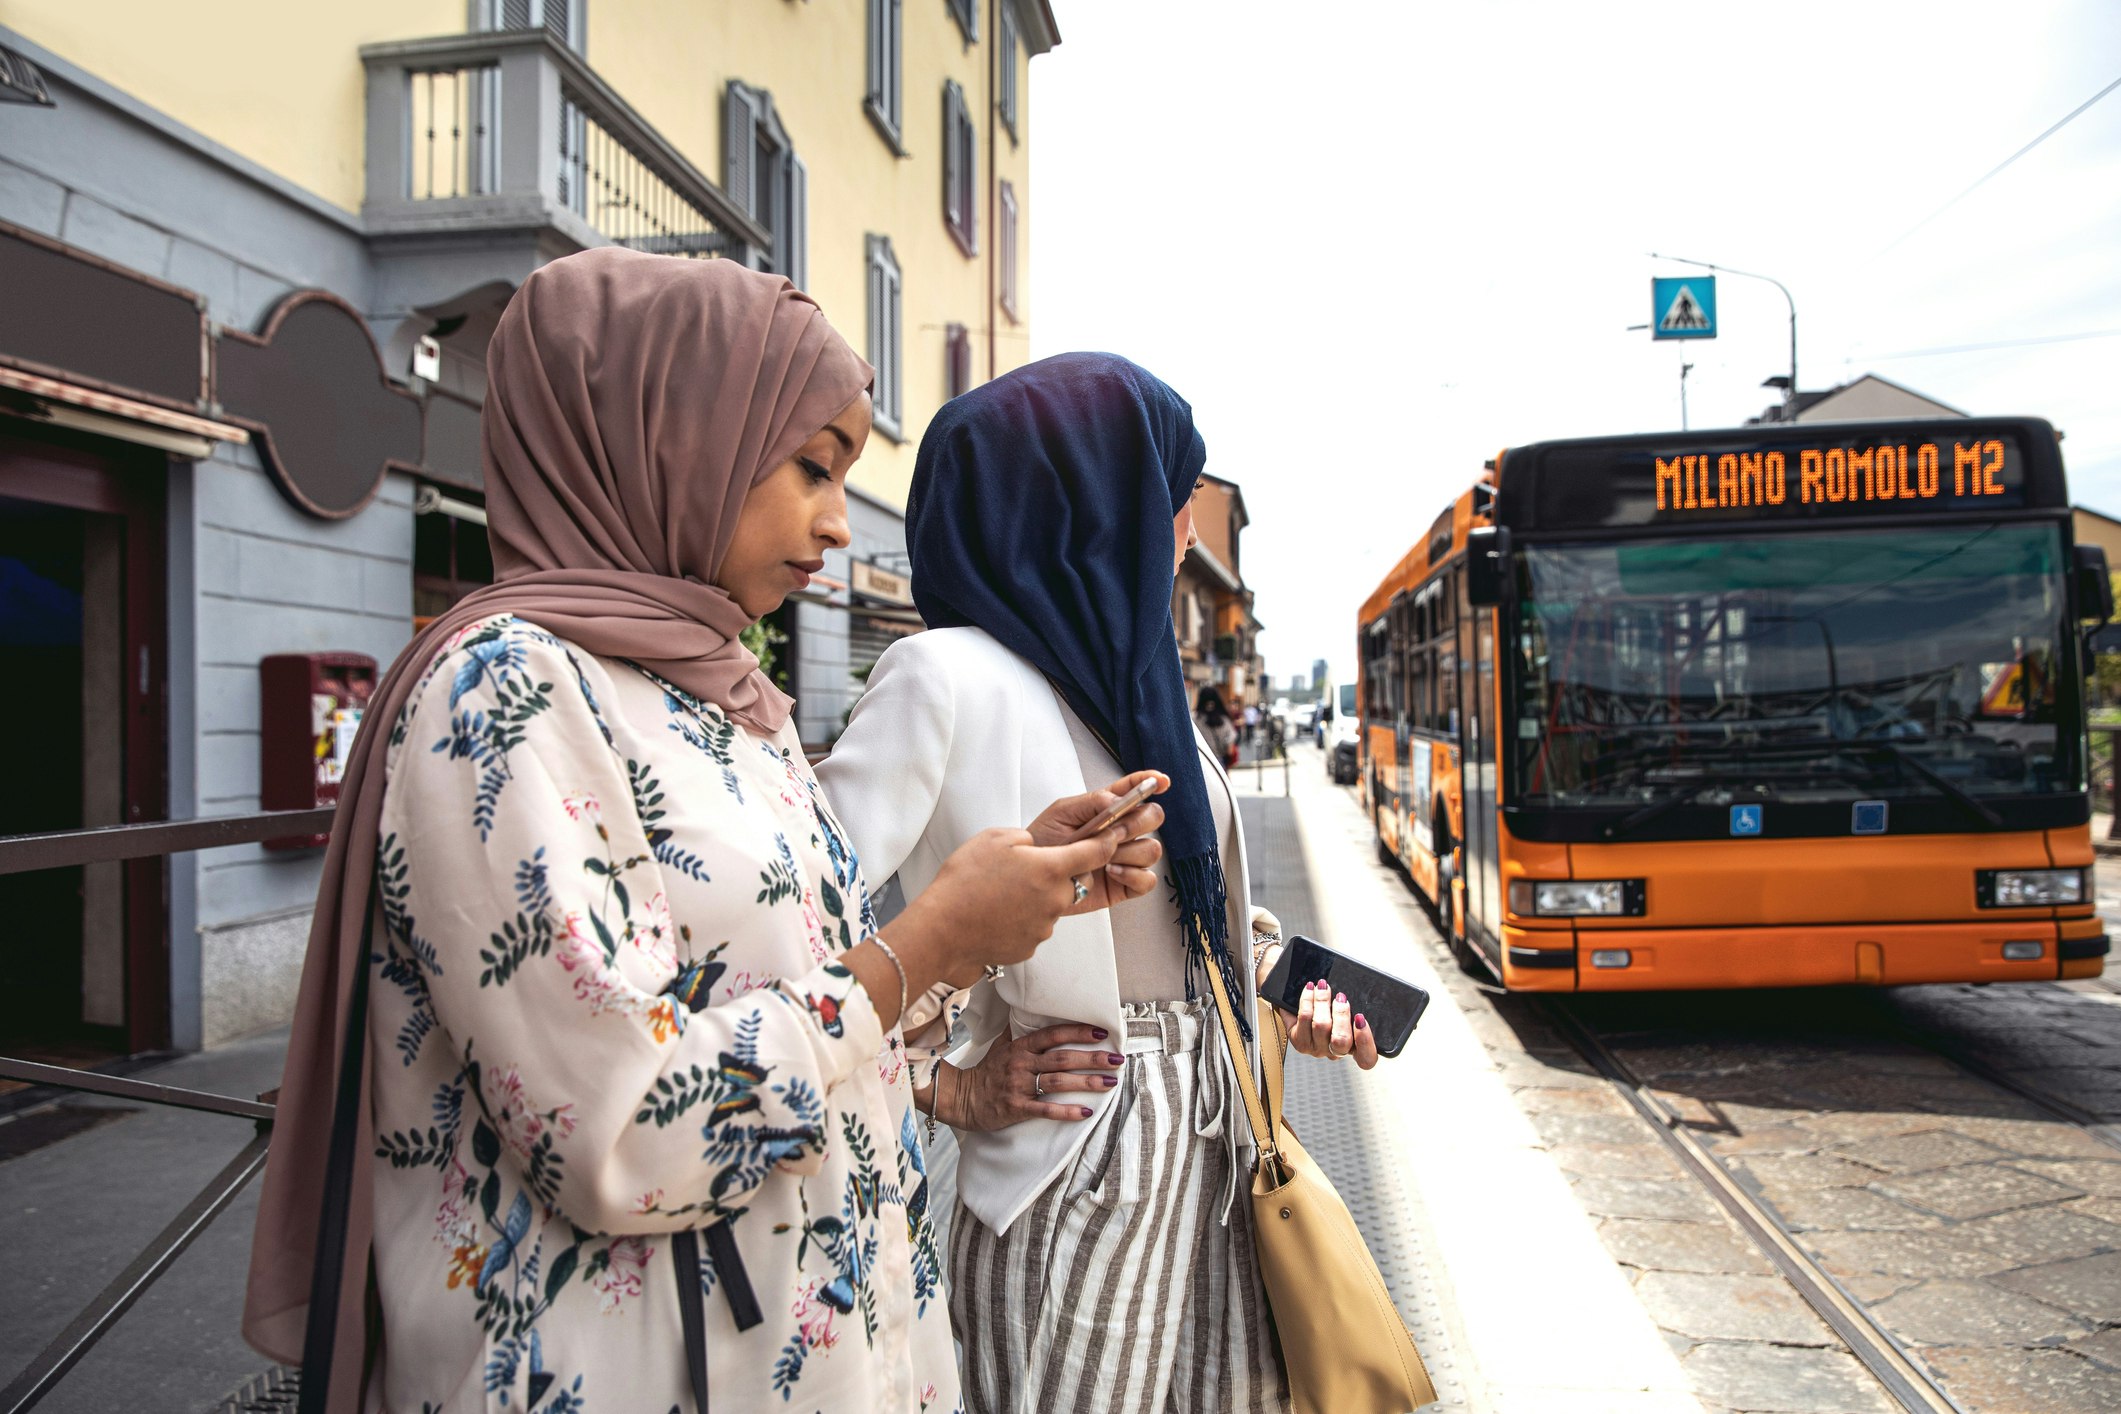 A pair of Muslim women, one in a mauve head scarf and the other in navy blue, turn slightly away from the camera as they wait for a bus in Milano, Italy which is pulling up on the right side of the frame